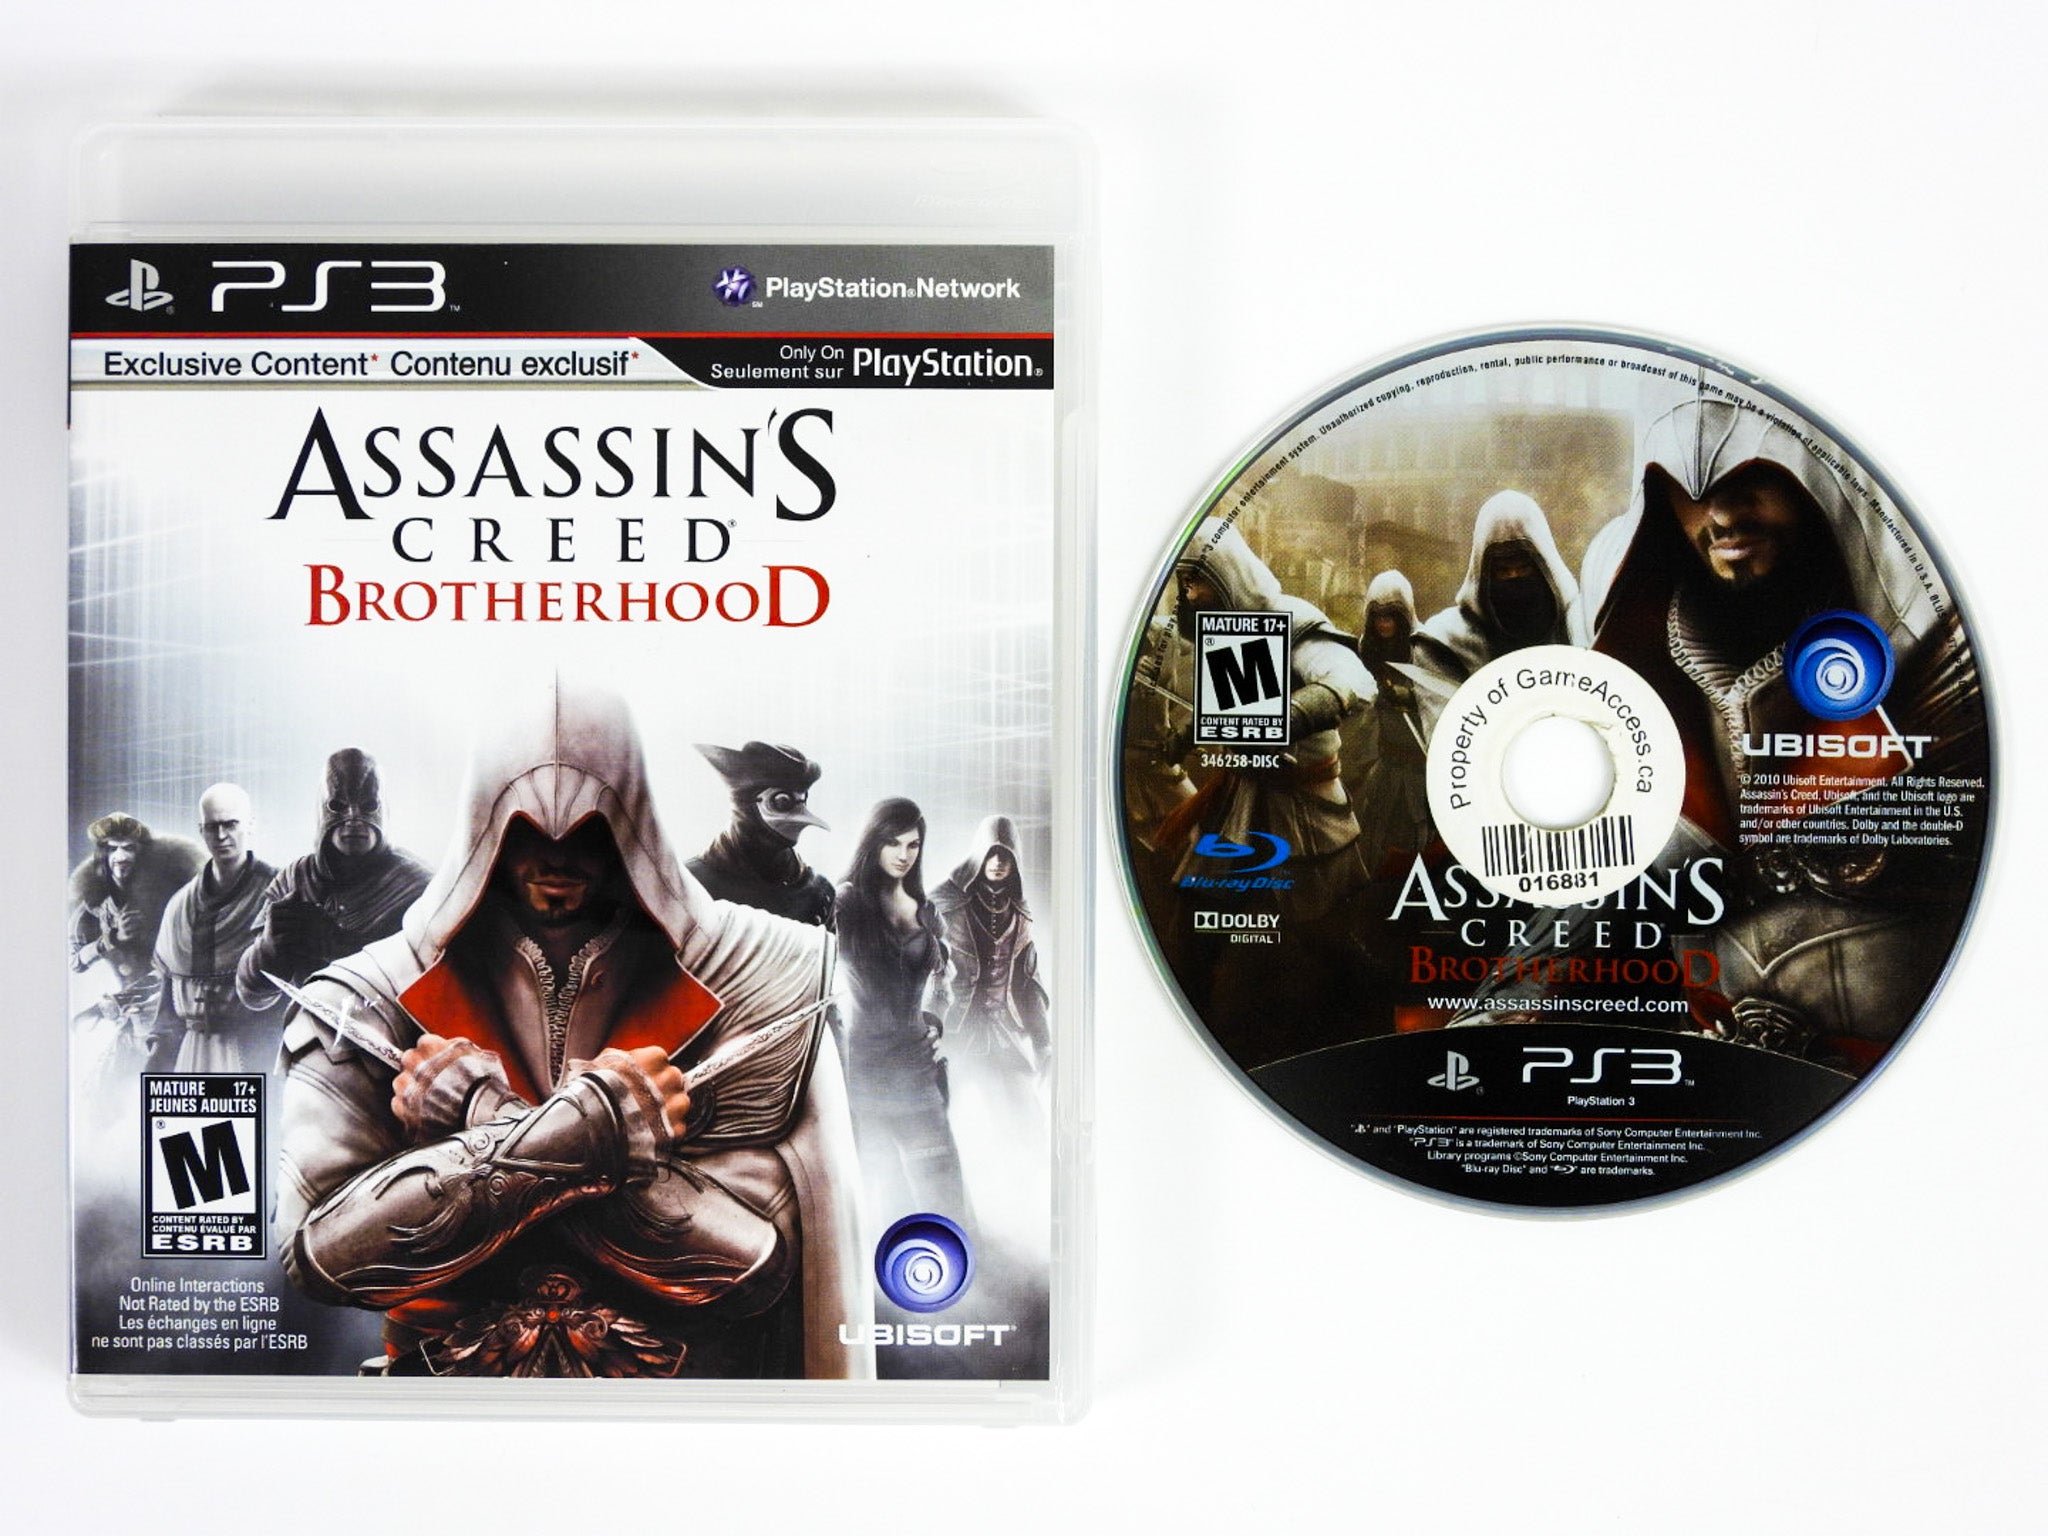 Assassin's Creed Platinum Edition Playstation 3 (PS3) Booklet ** VERY RARE  GAME